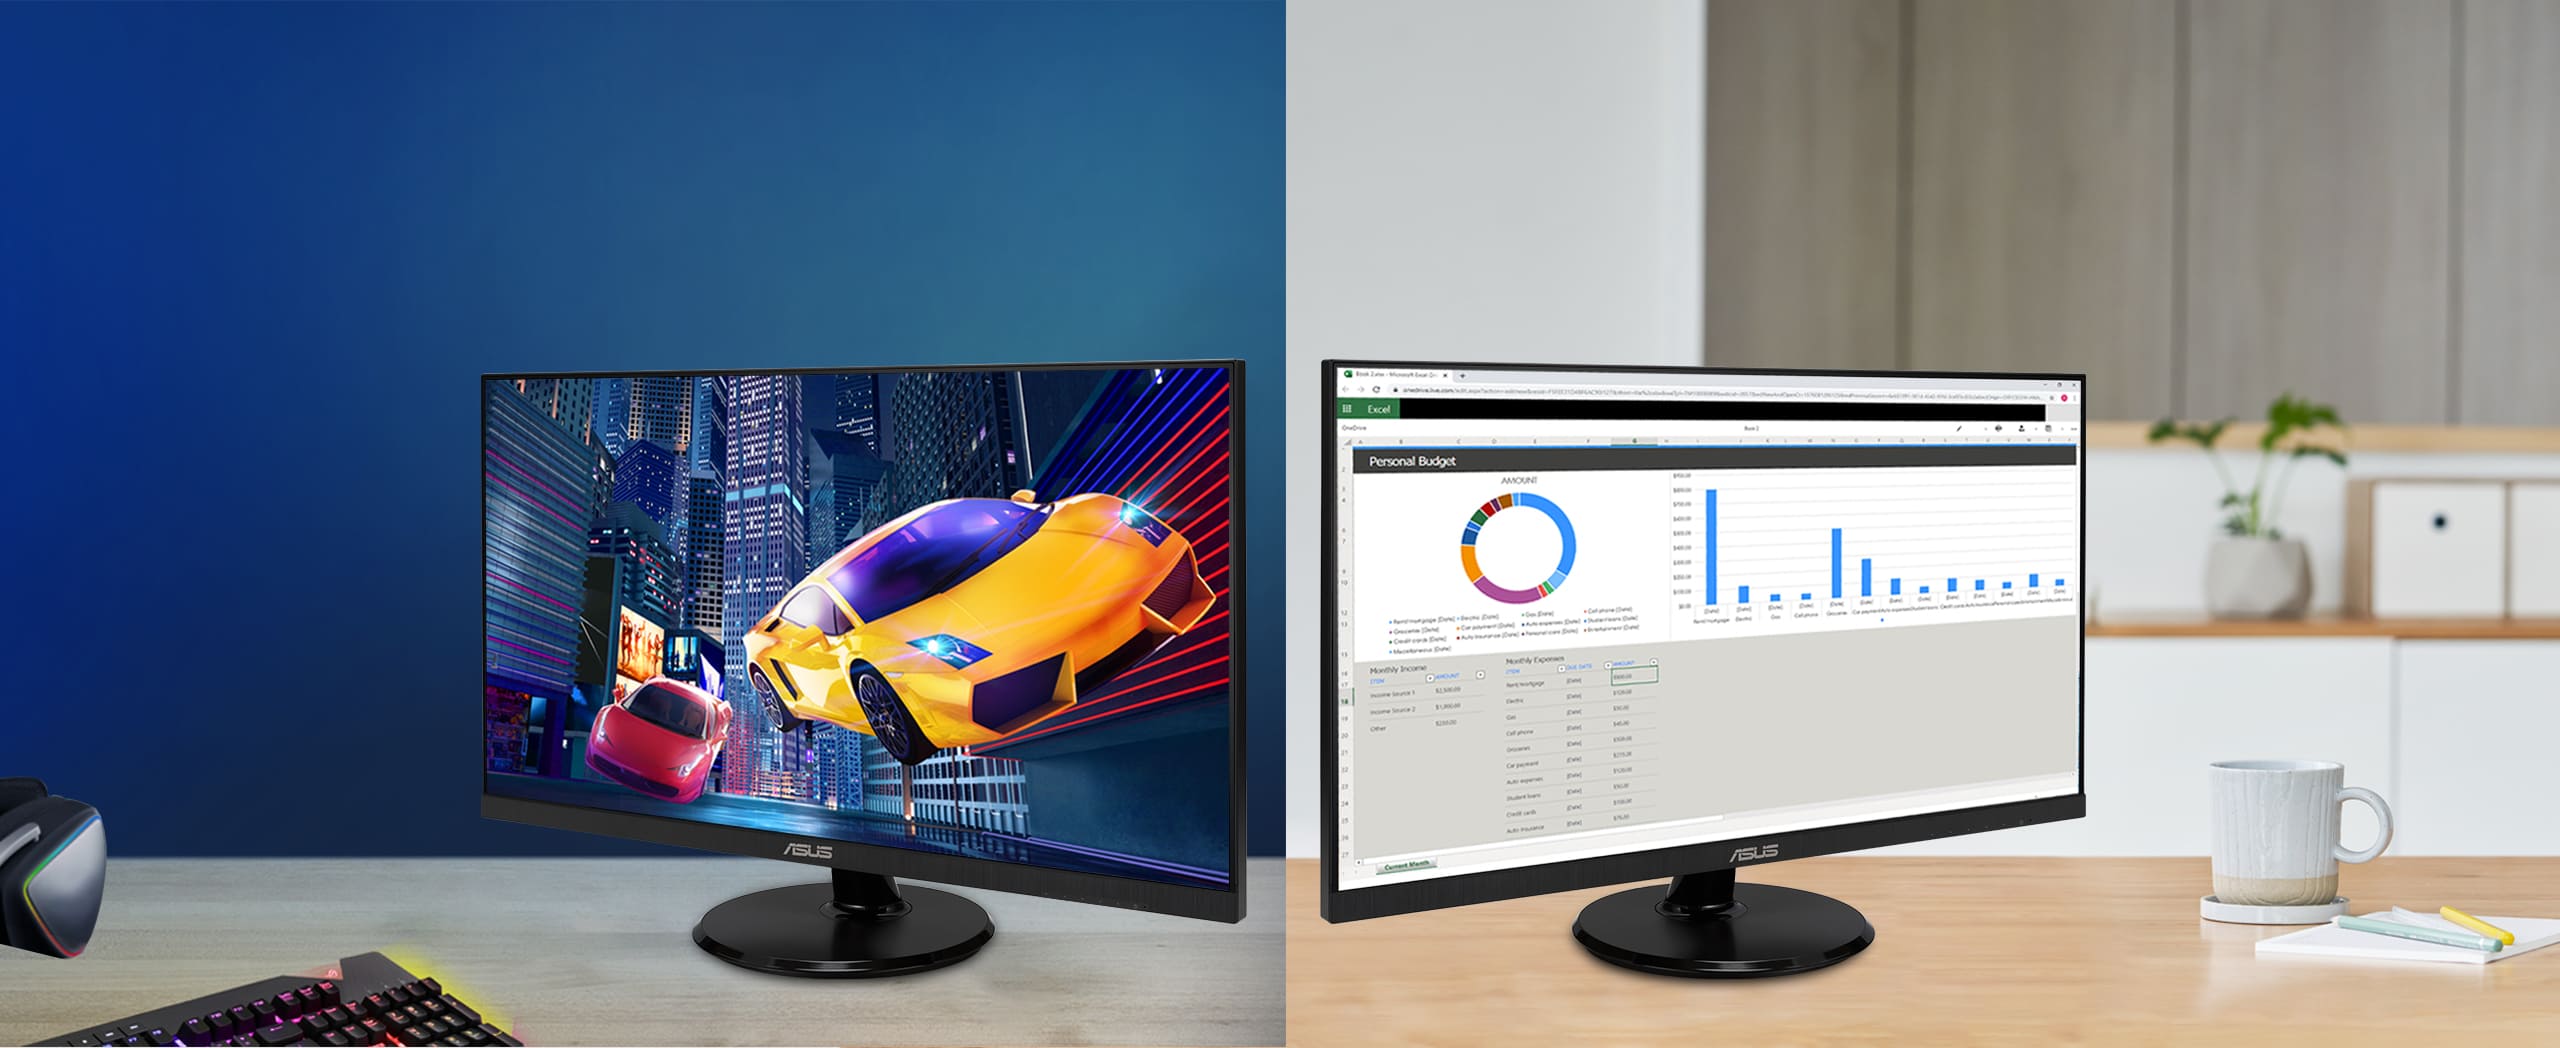 ASUS VA24DQF is 24-inch (23.8-inch viewable) IPS Eye Care Gaming monitor with fast 100Hz refresh rate and Adaptive-Sync technology to eliminate screen tearing and choppy frame rates for the smoother-than-ever experience.